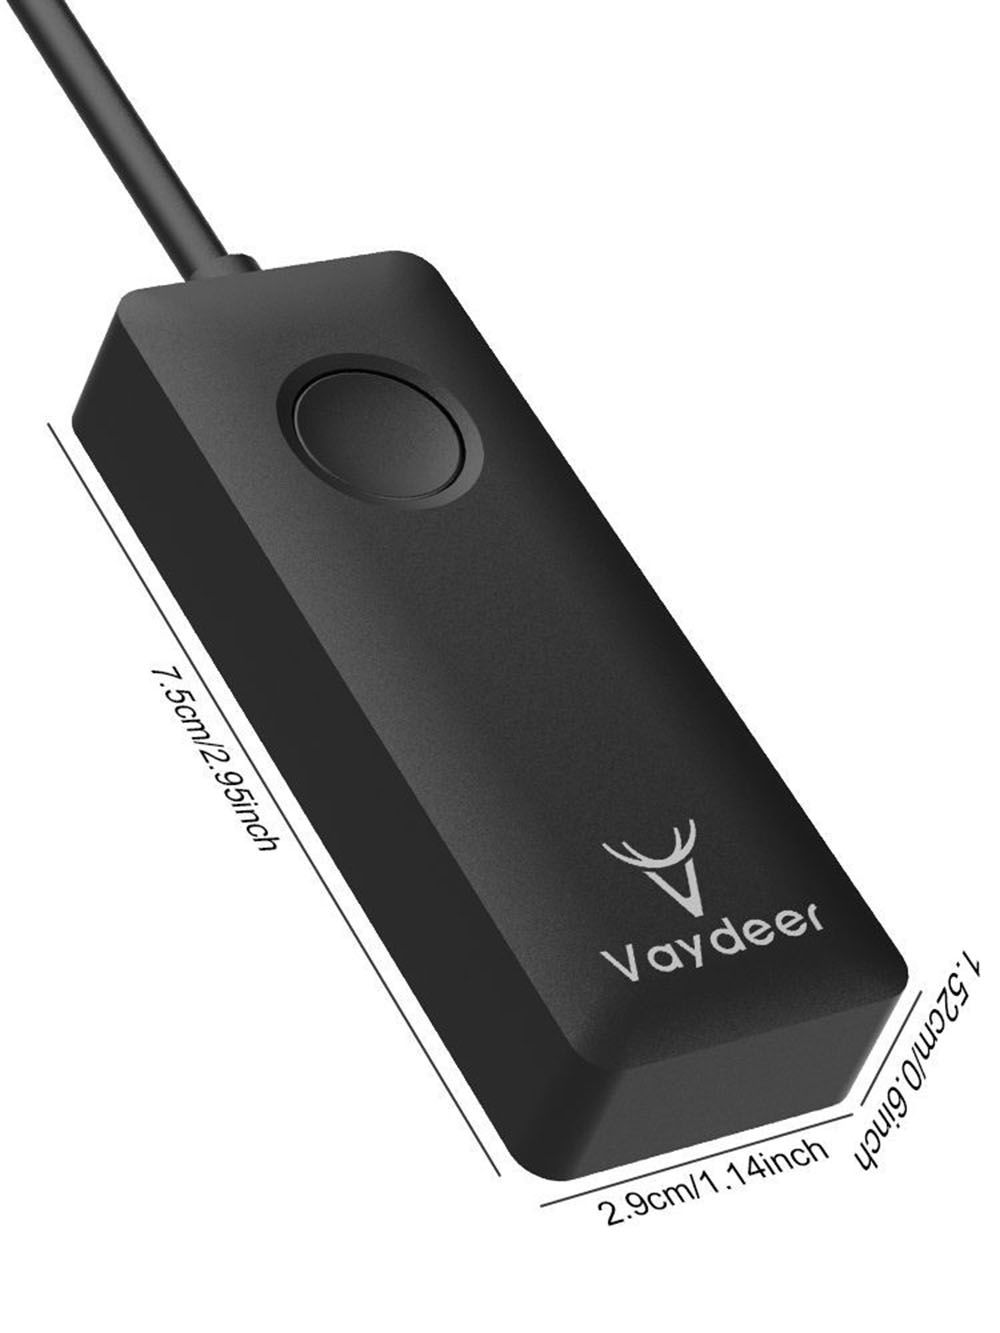 Vaydeer-FXMQ001-USB-Wired-Computer-Automatic-Mouse-Movers-Square-Anti-Dormant-Device-Analog-Driveles-1725113